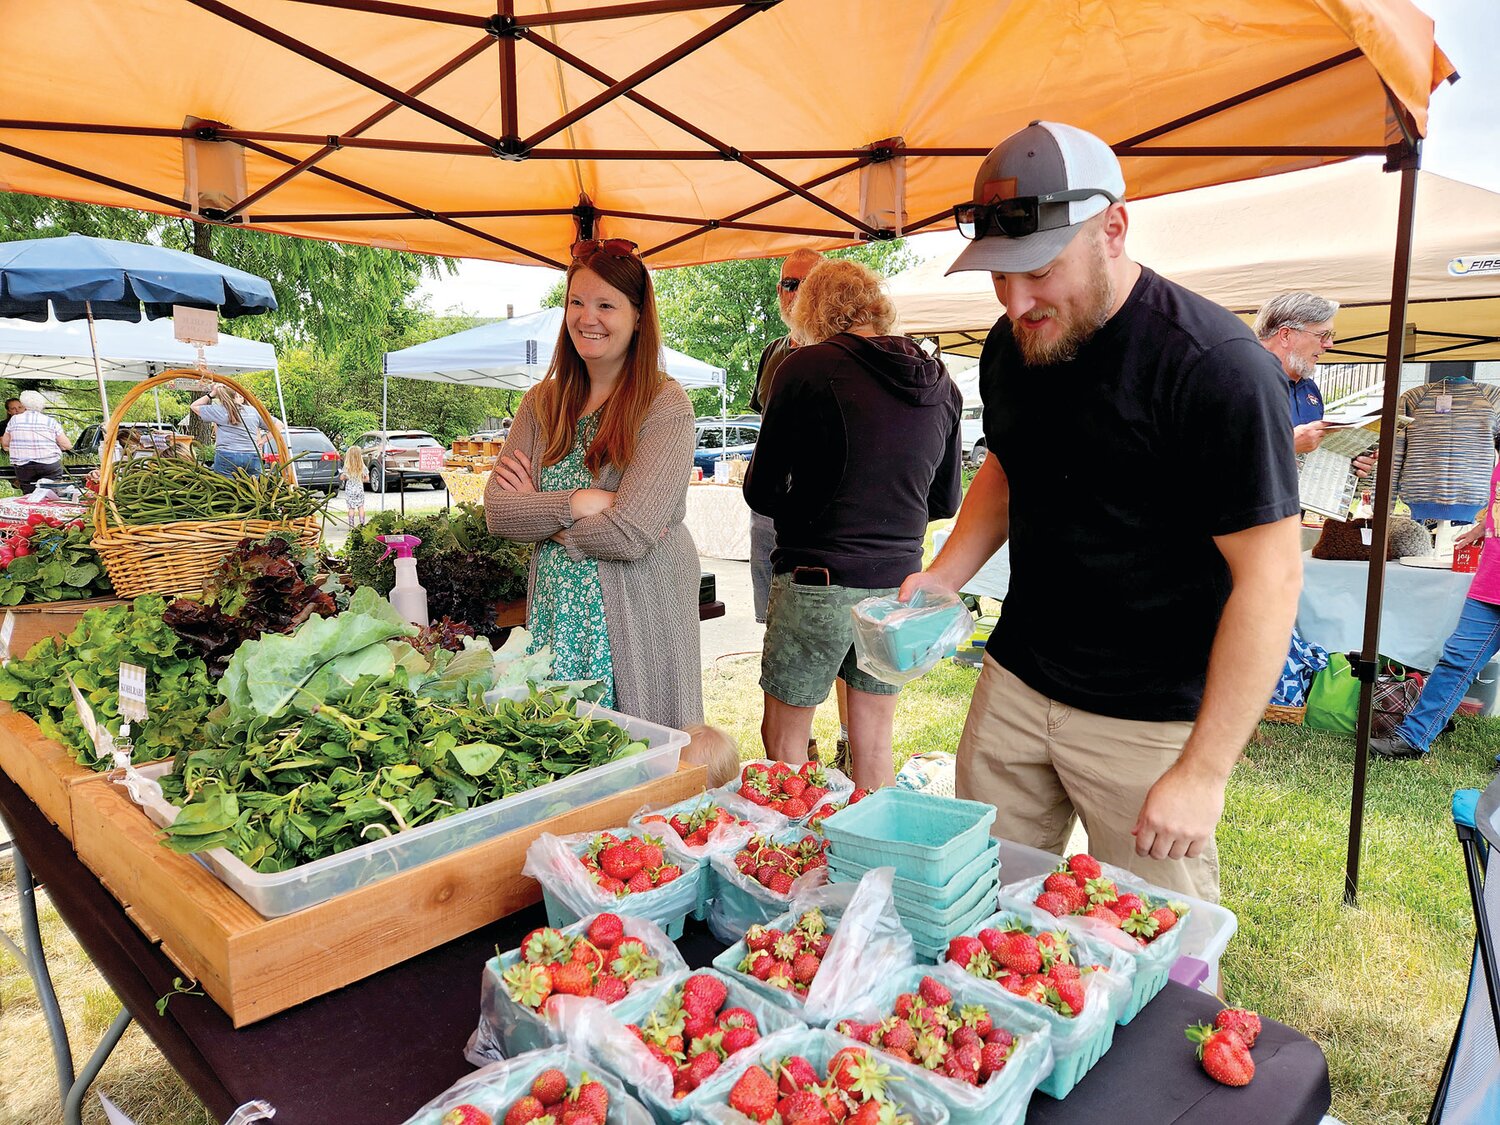 Gilbert Grove Farm in Plumsteadville was popular at the opening of the Plumsteadville Grange Farmers Market on June 3. The market continues Saturday mornings through October at the grange building on Route 611.